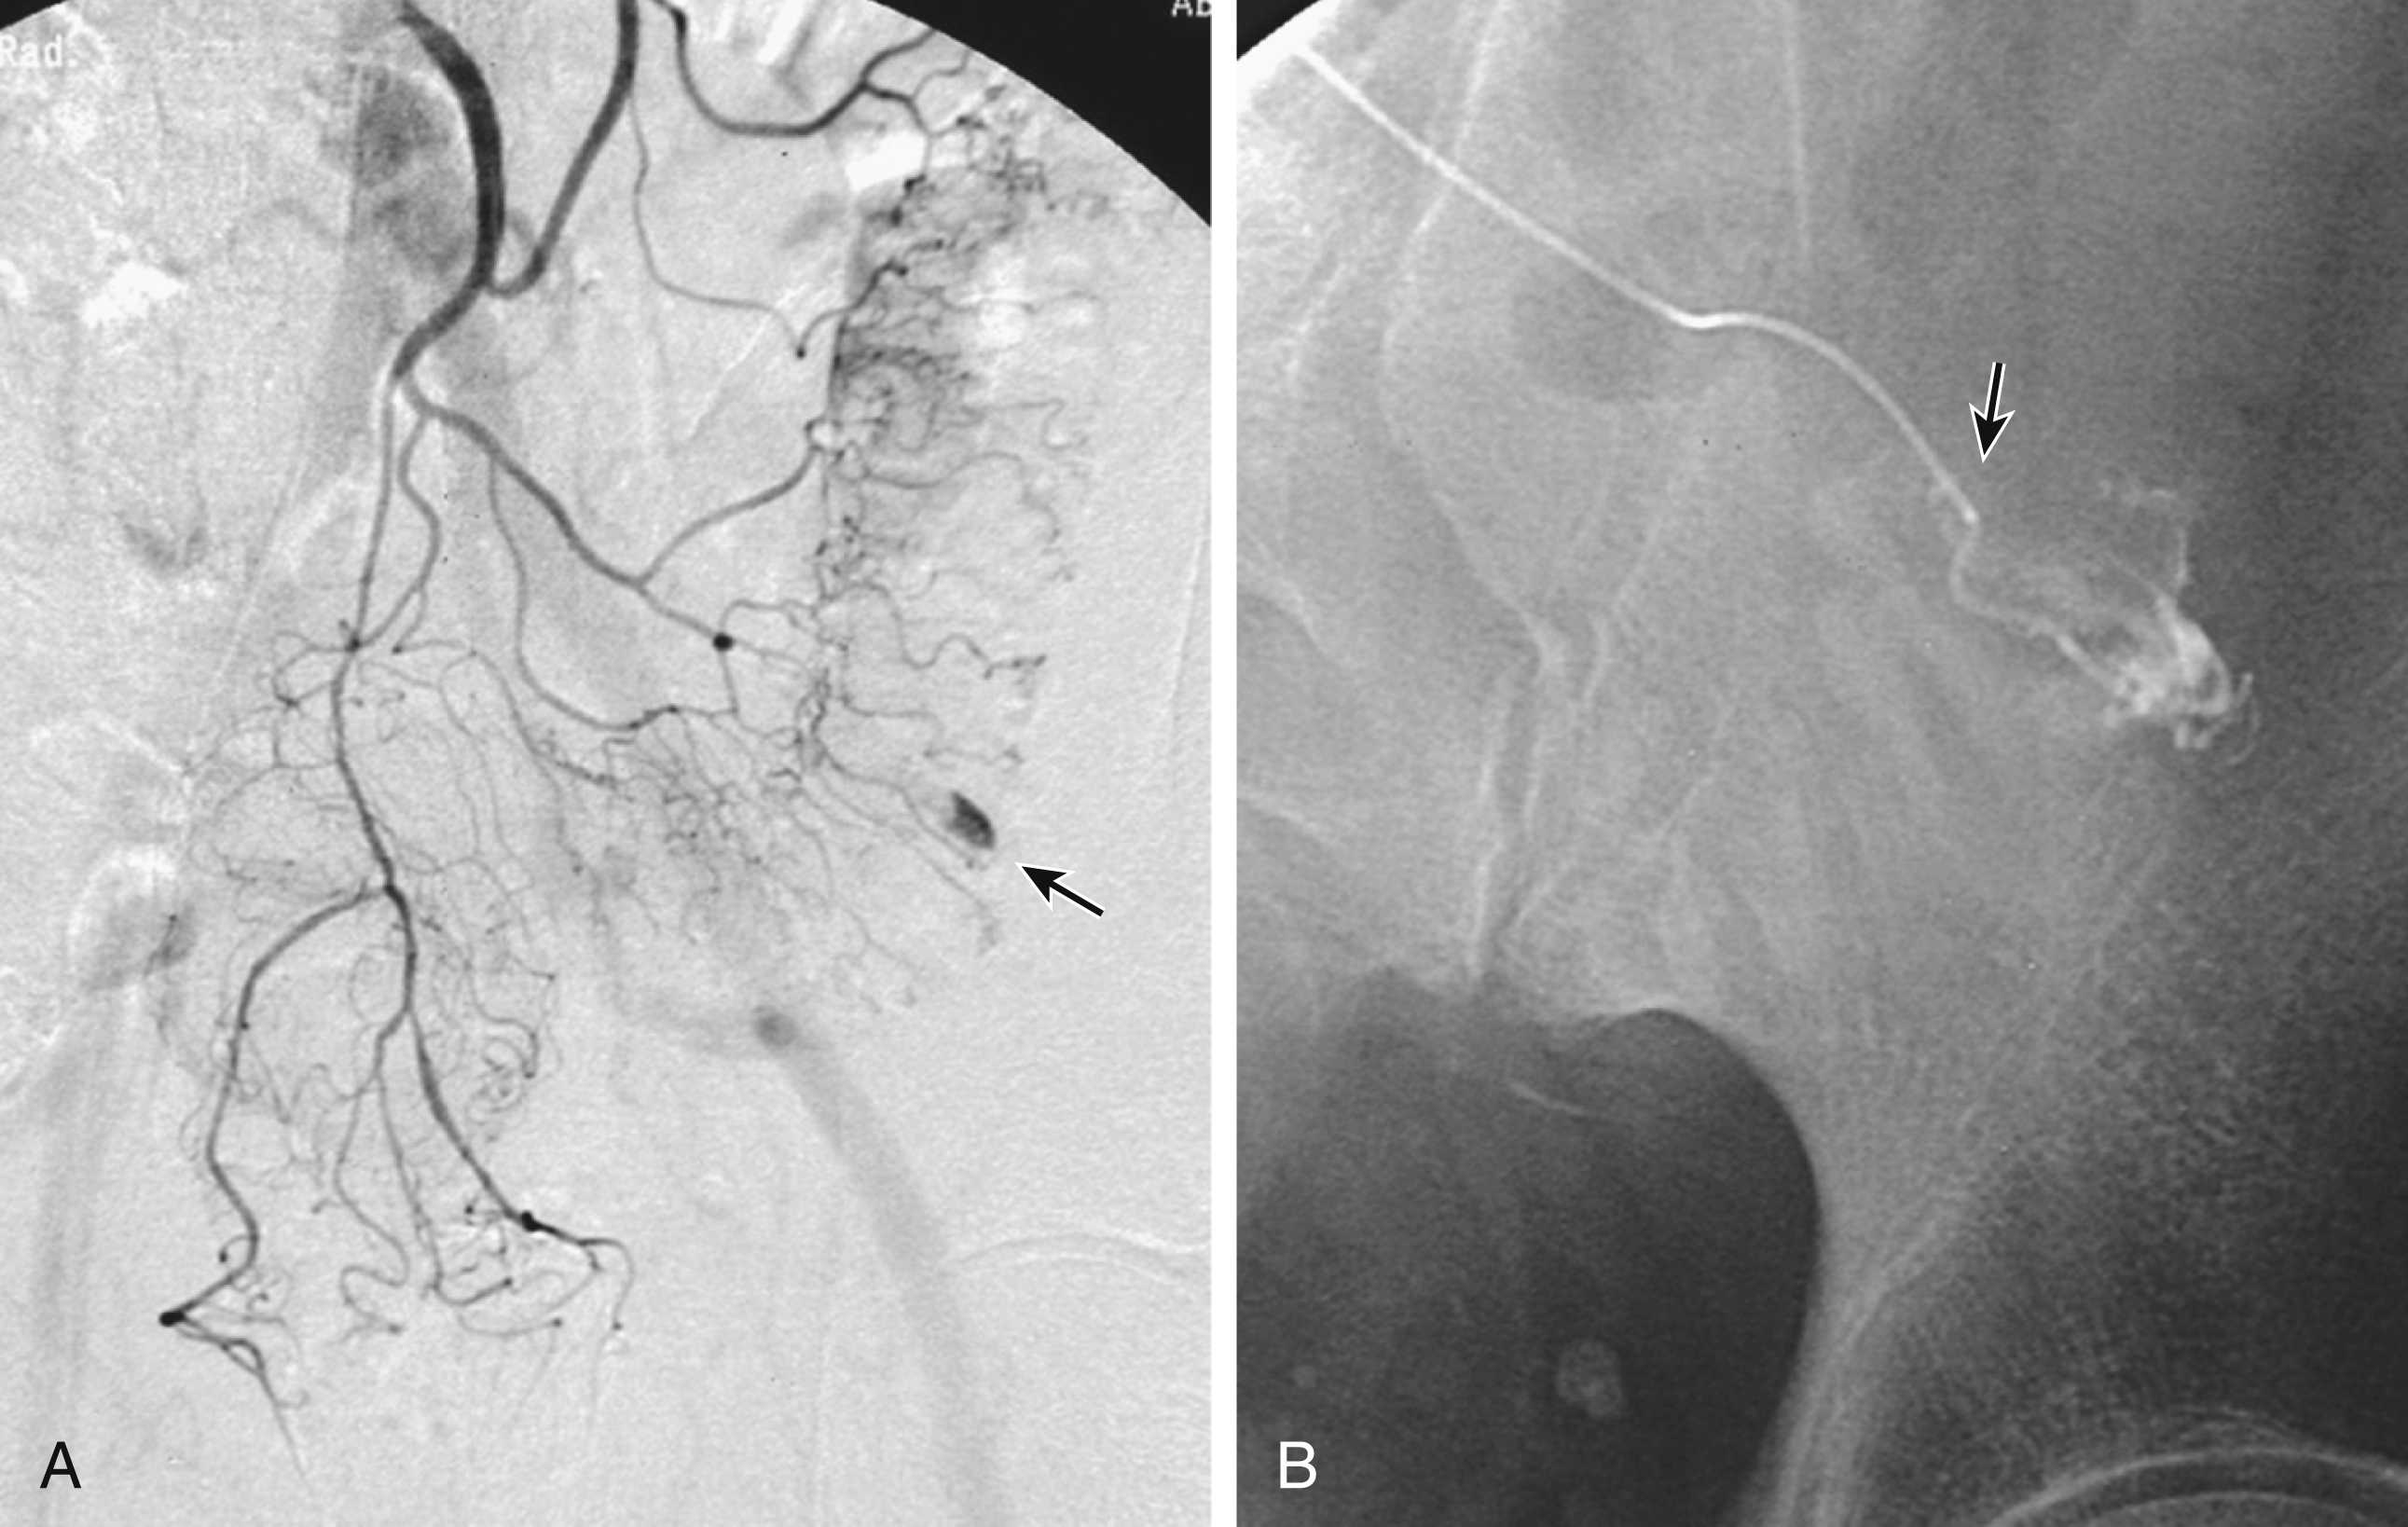 Fig. e27.2, (A) Inferior mesenteric artery (IMA) arteriogram with extravasation of contrast ( arrow ) in sigmoid colon. (B) Highly magnified view showing that microcatheter tip ( arrow ) has been advanced into vasa recta in the bowel wall and very close to site of bleeding. A single microcoil placed in this position occluded the vasa recta and terminated bleeding.